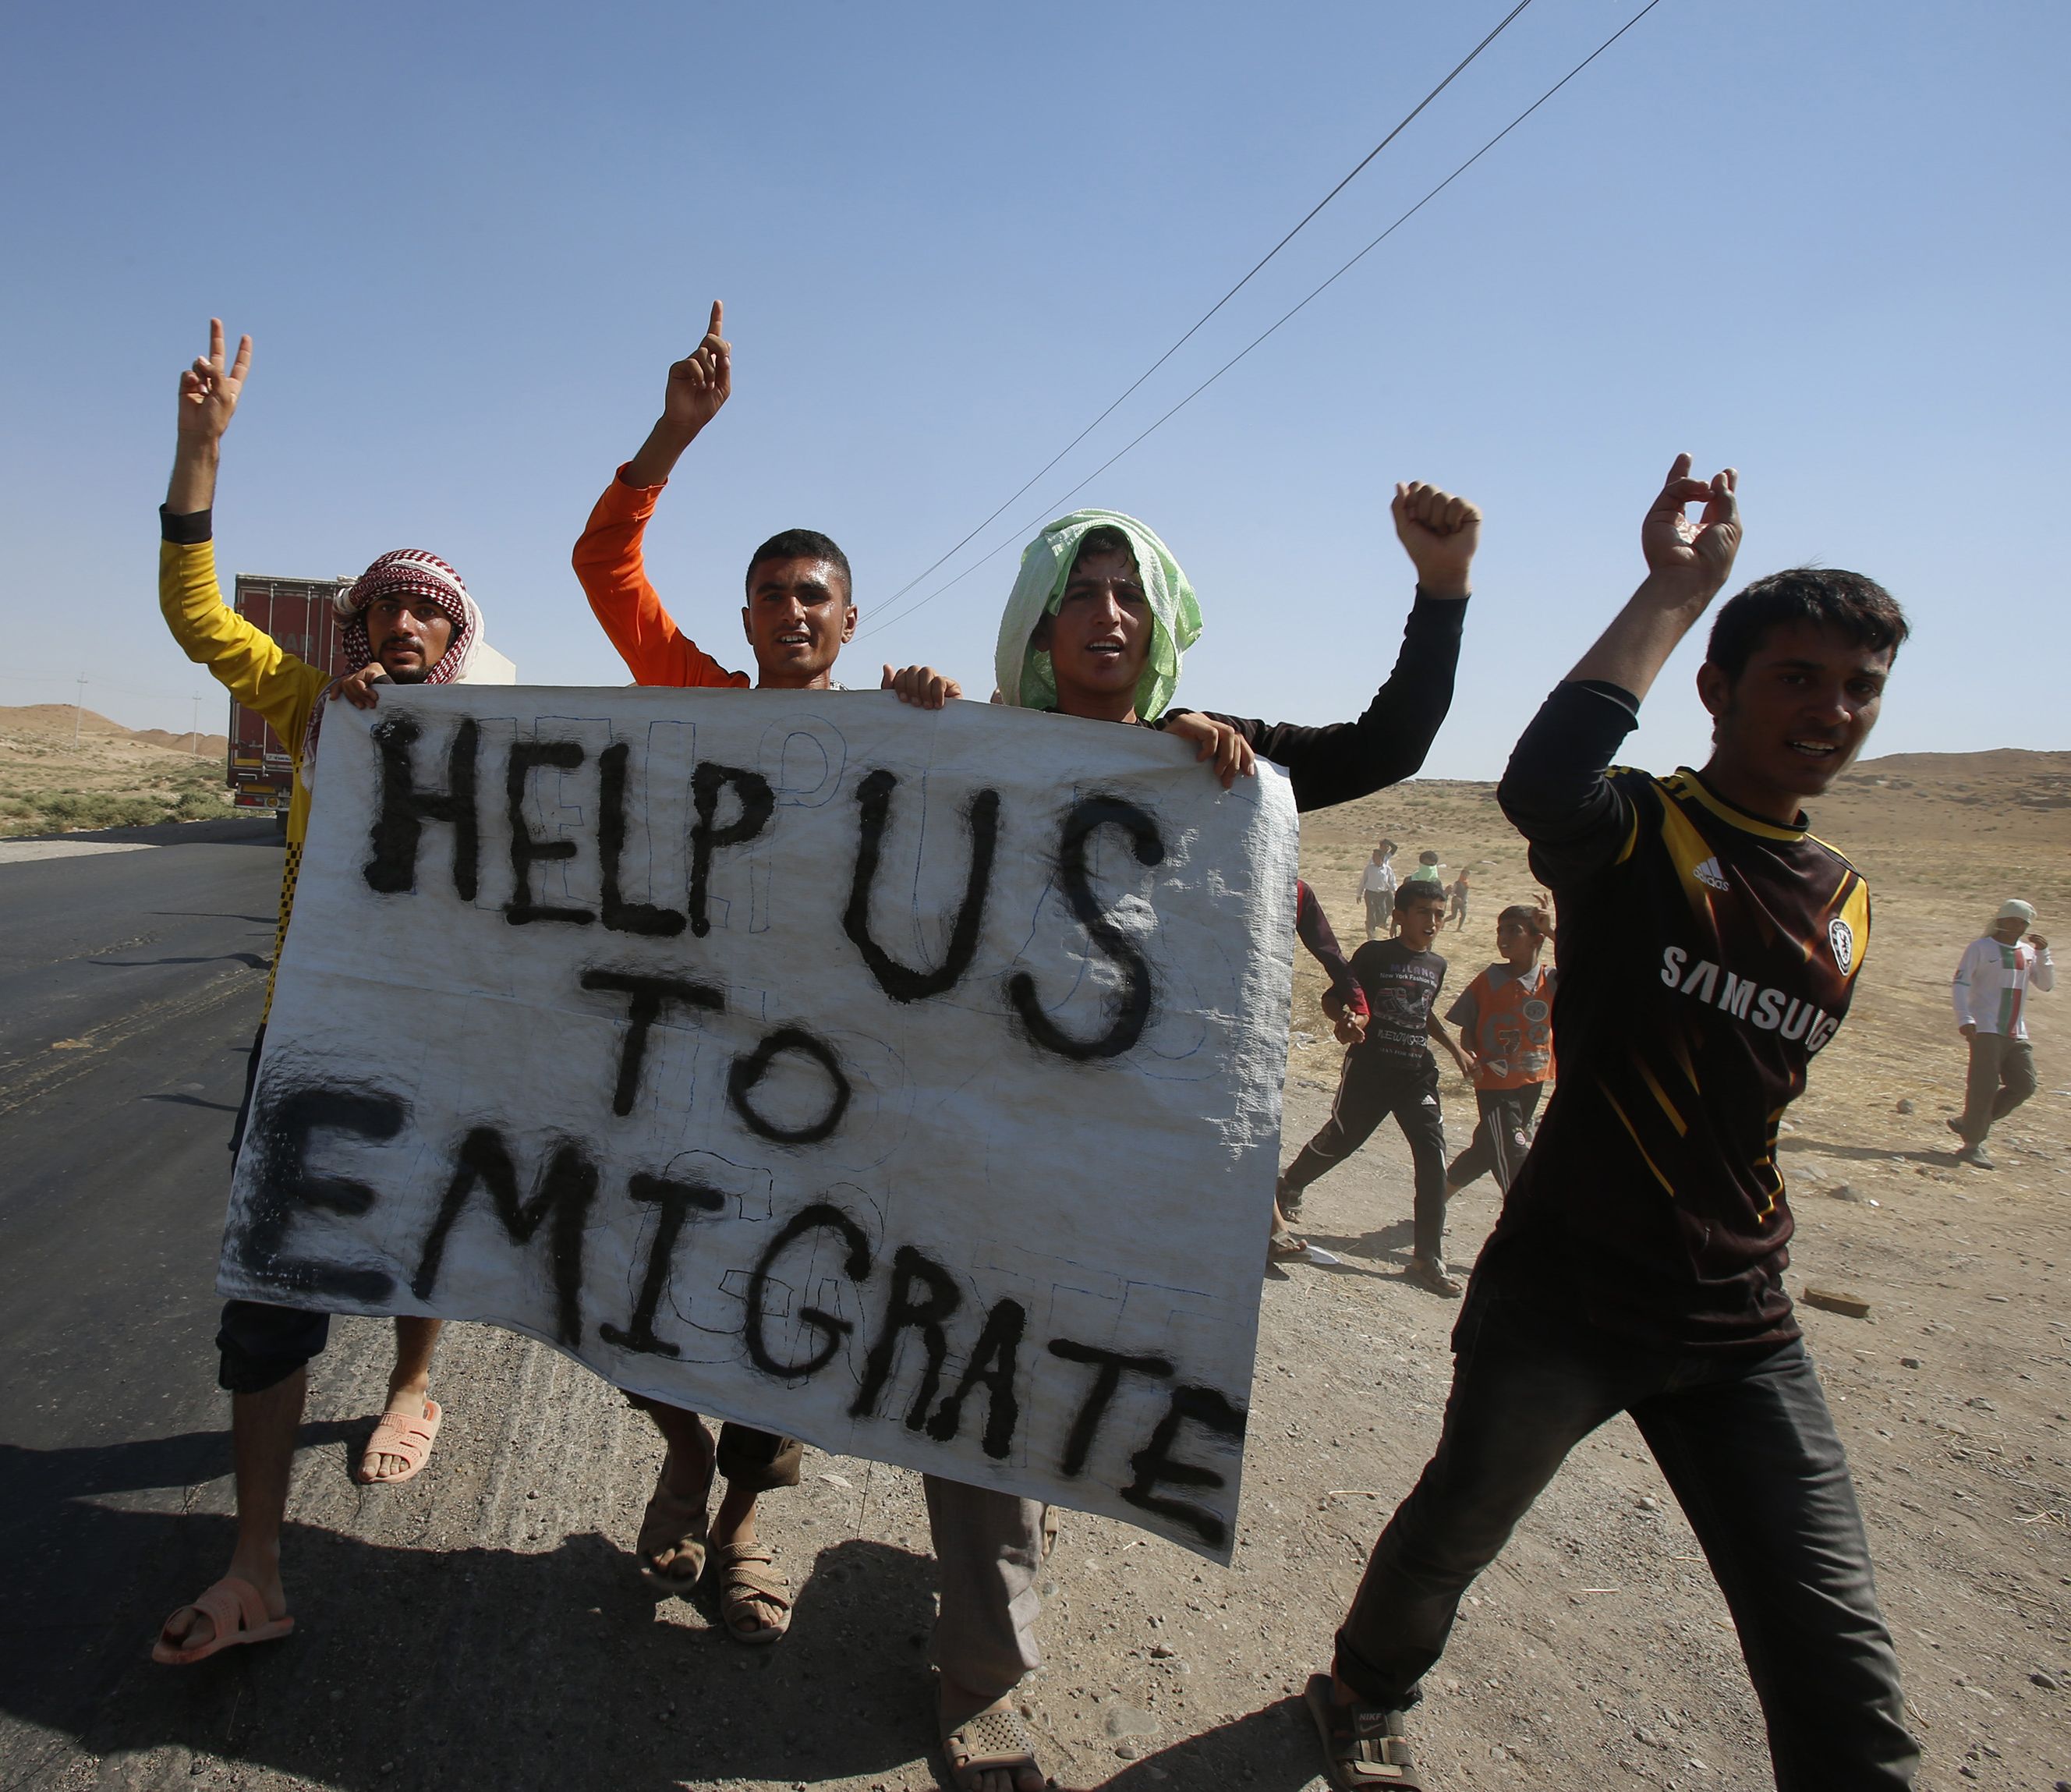 Displaced people from the minority Yazidi sect, who fled the violence in the Iraqi town of Sinjar, hold a banner as they take part in a demonstration at the Iraqi-Syrian border crossing in Fishkhabour, Dohuk province.